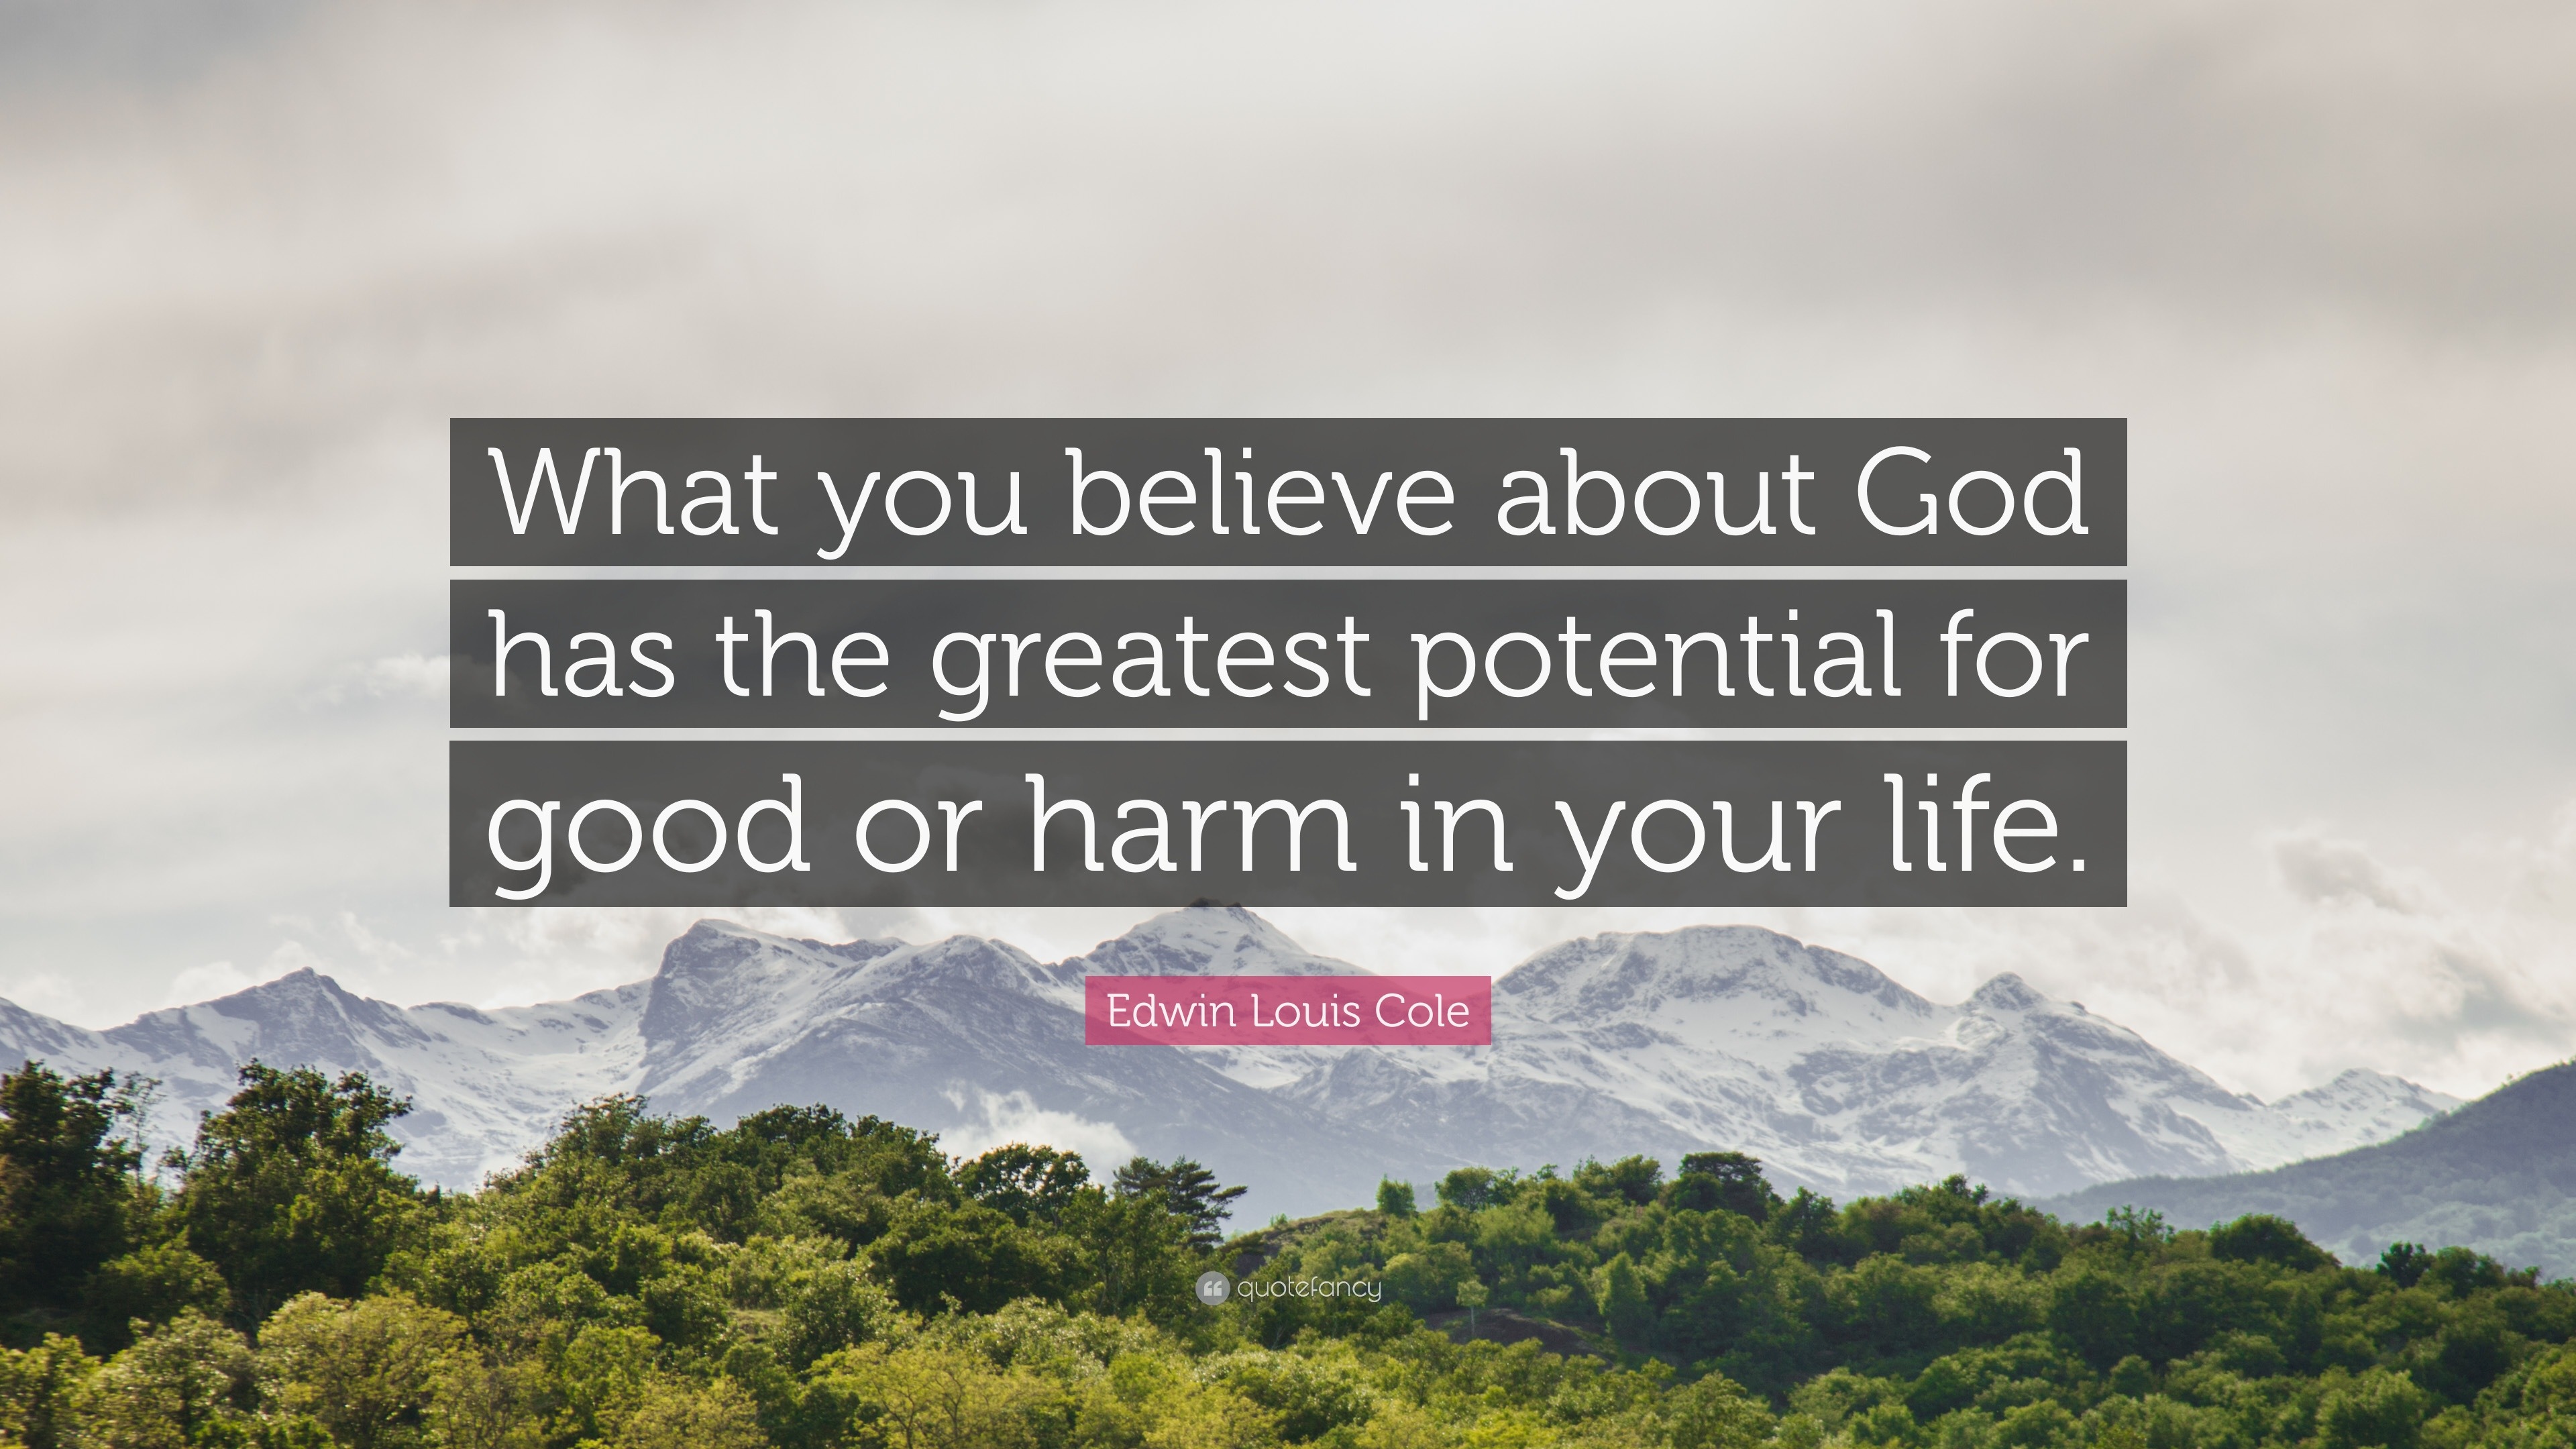 Edwin Louis Cole Quote: “What you believe about God has the greatest  potential for good or